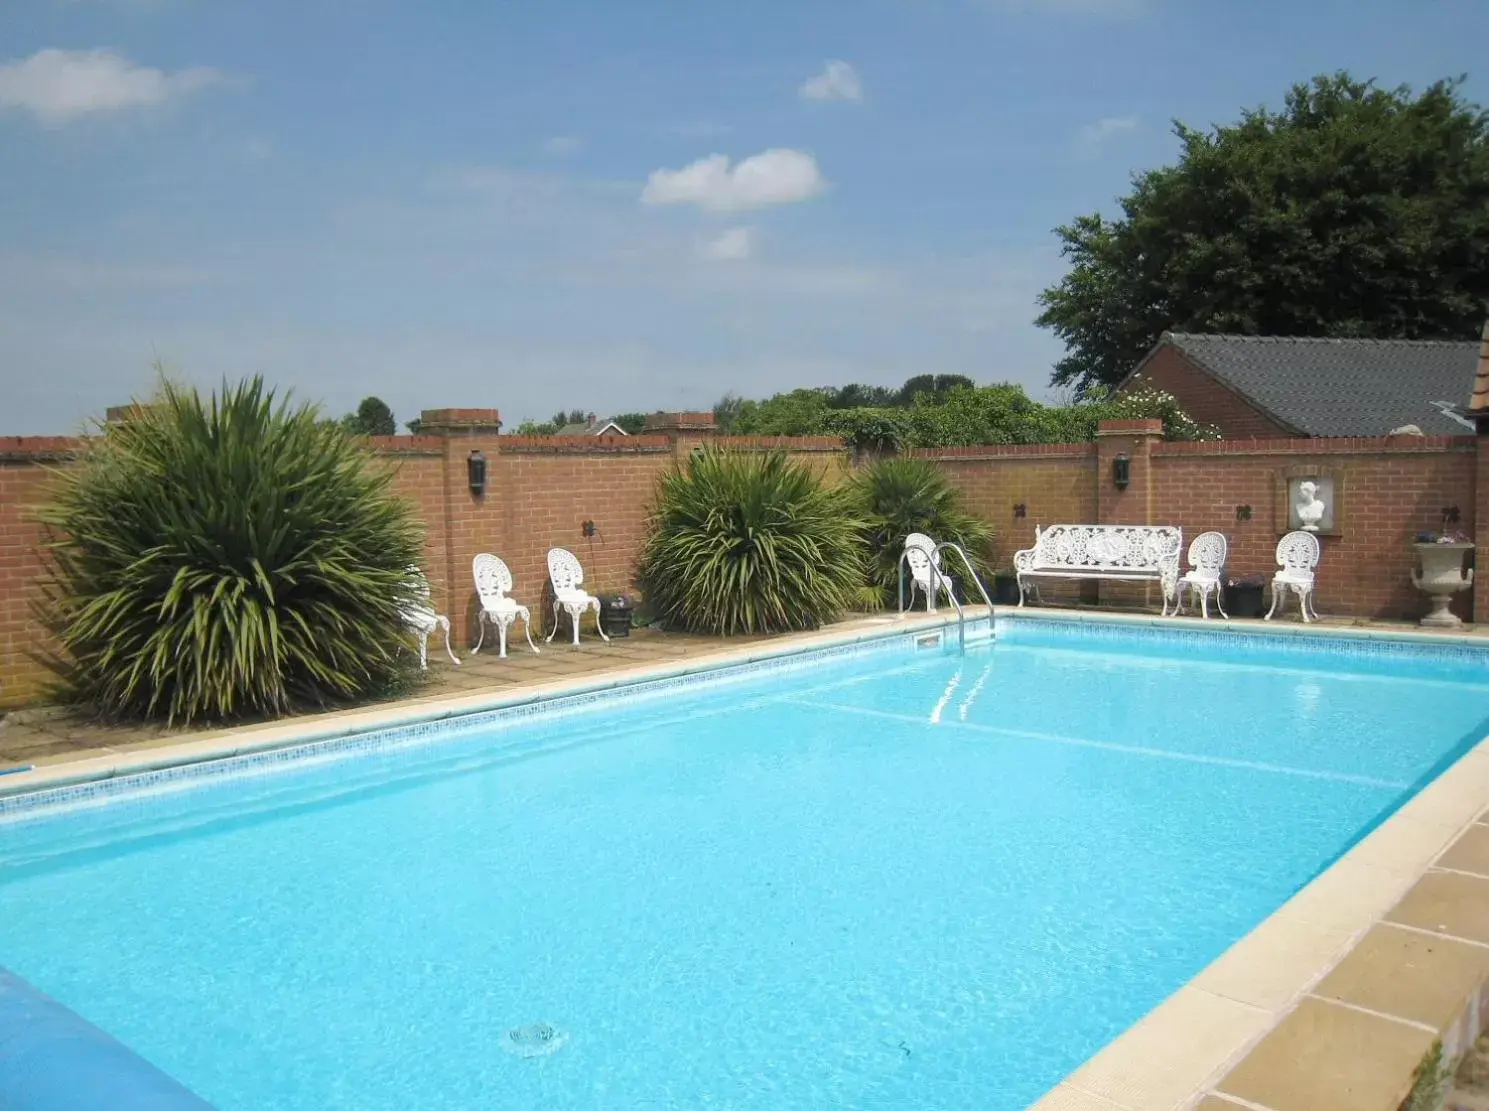 Patio, Swimming Pool in Old Rectory Hotel, Crostwick